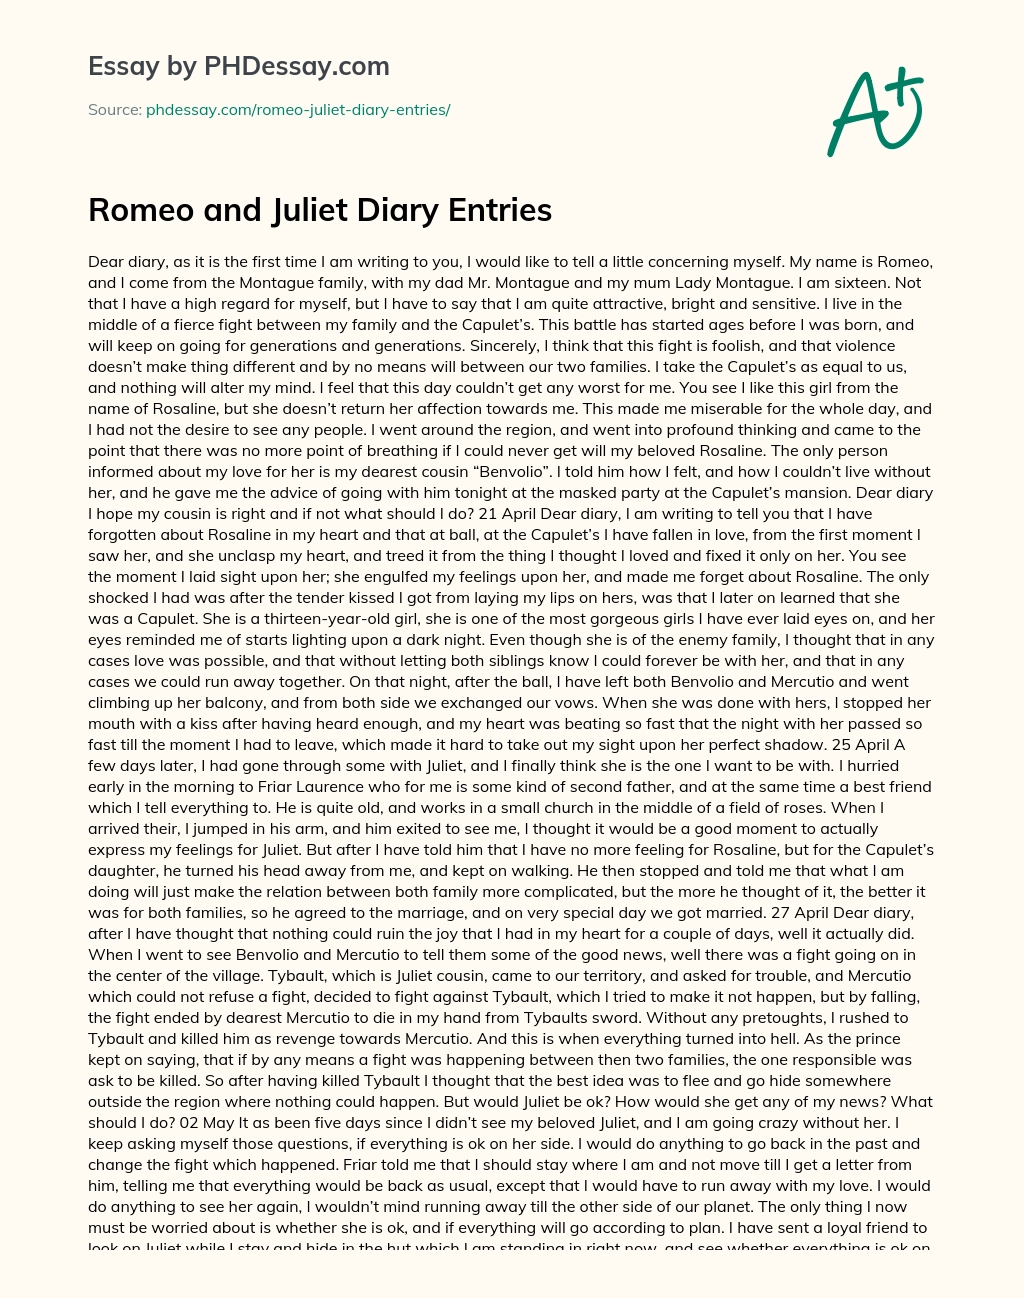 Romeo and Juliet Diary Entries essay